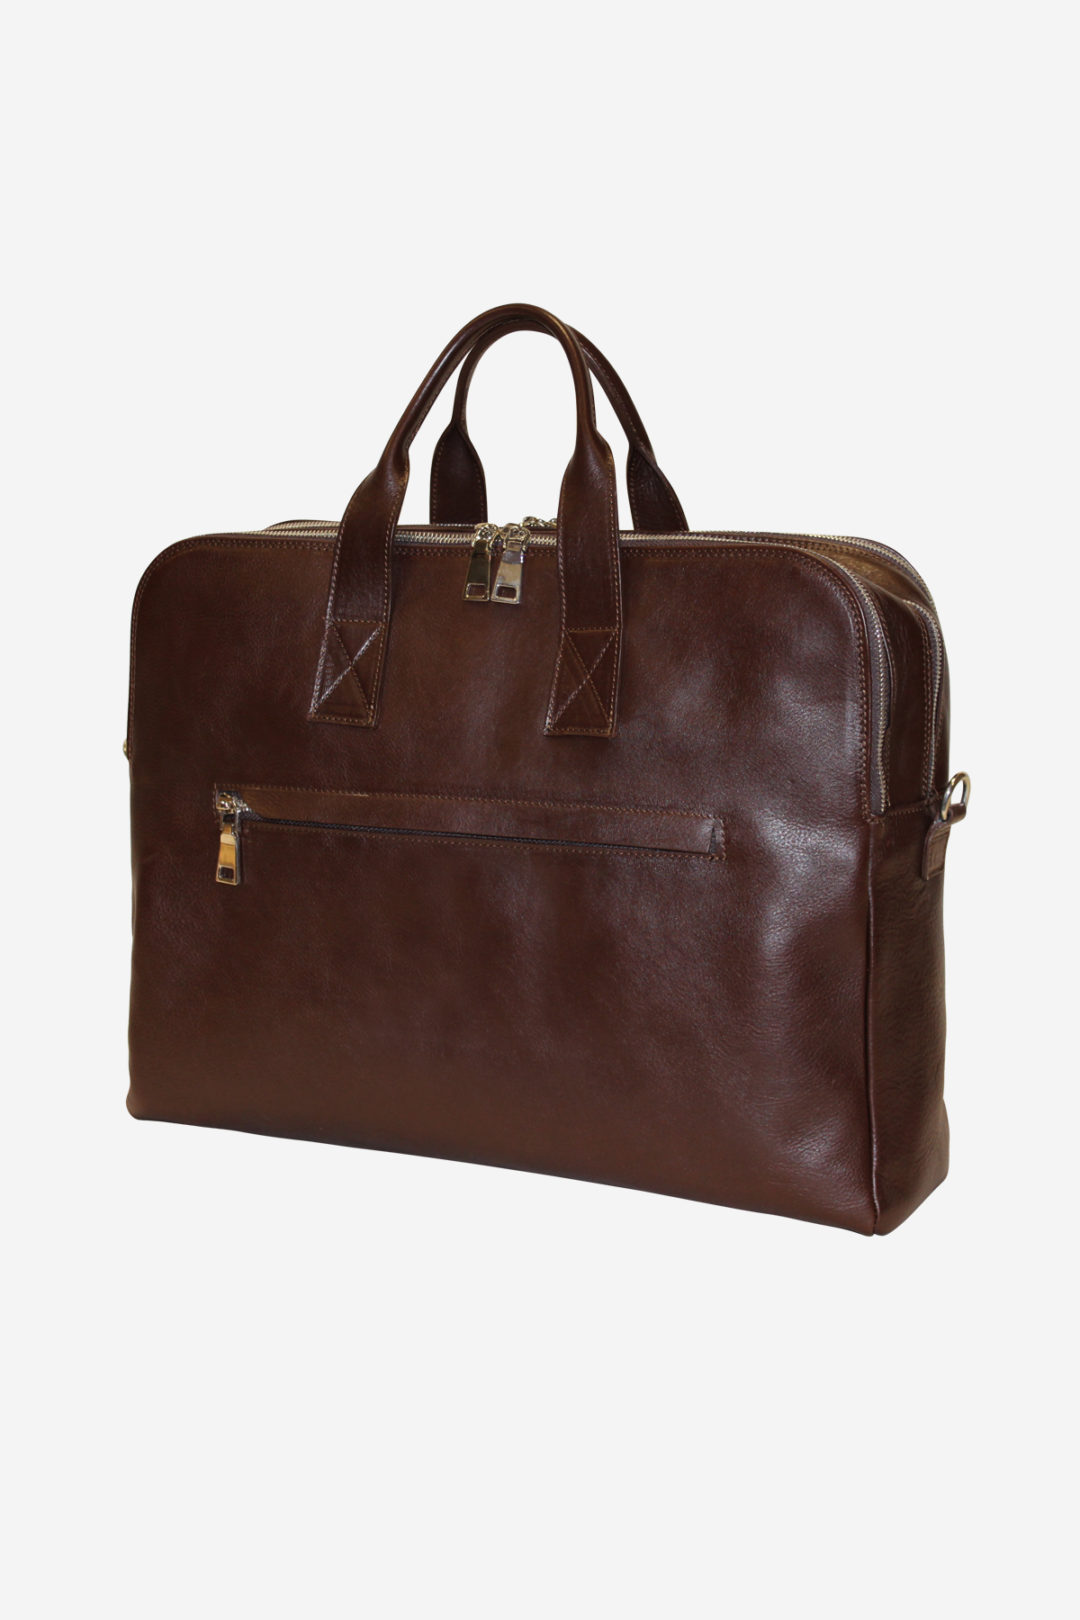 The Briefcase handmade in italy vegetable tanned leather briefcase terrida venezia leather bags italian bags business travel fashion